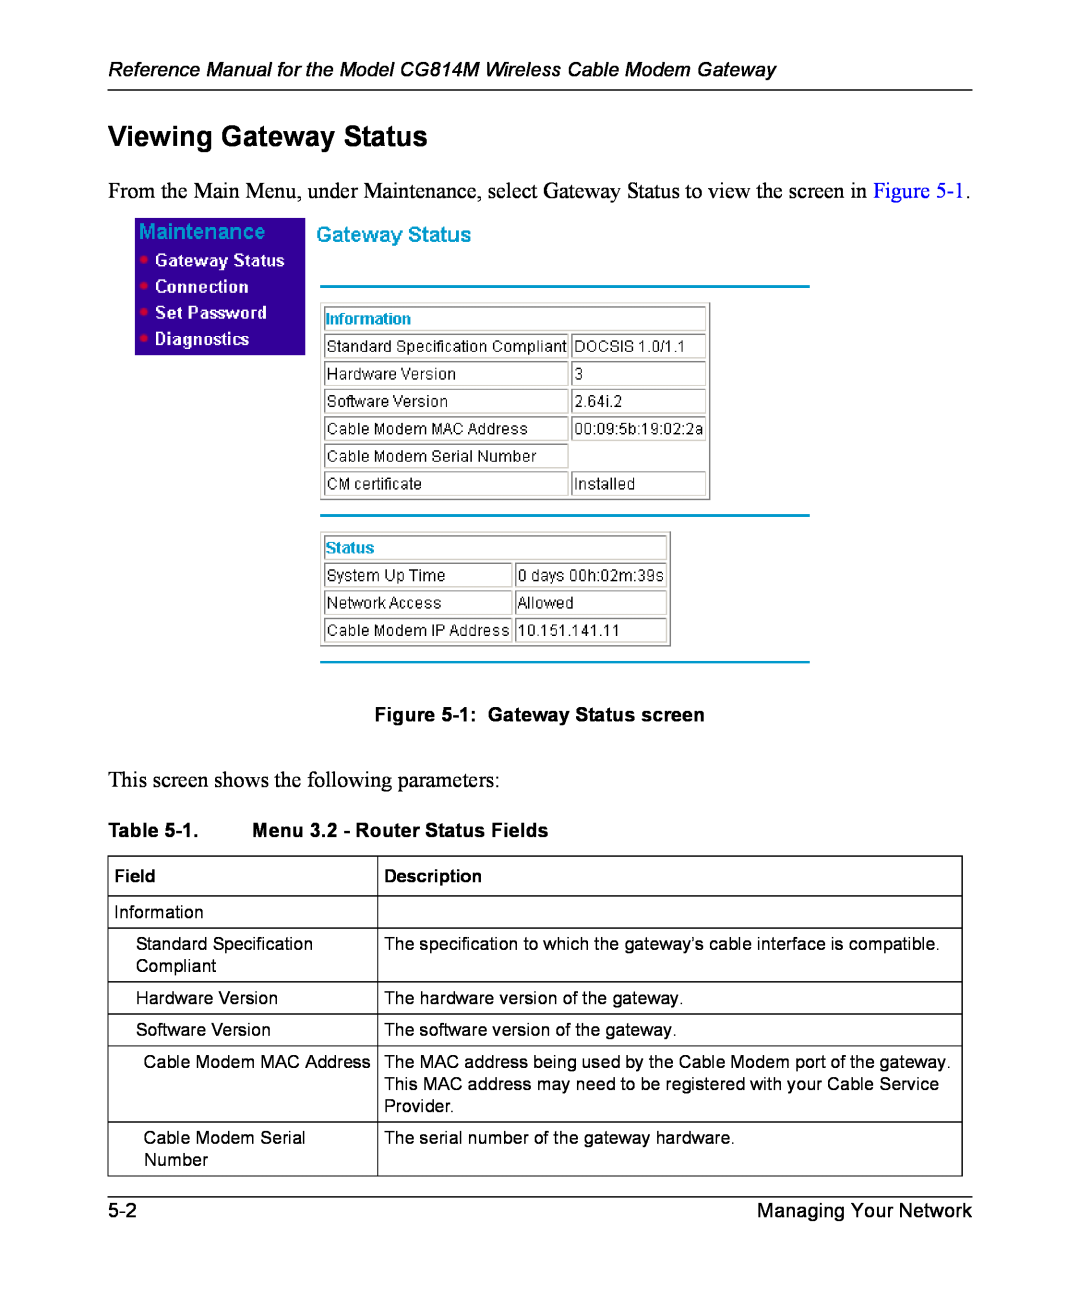 NETGEAR manual Viewing Gateway Status, Reference Manual for the Model CG814M Wireless Cable Modem Gateway 